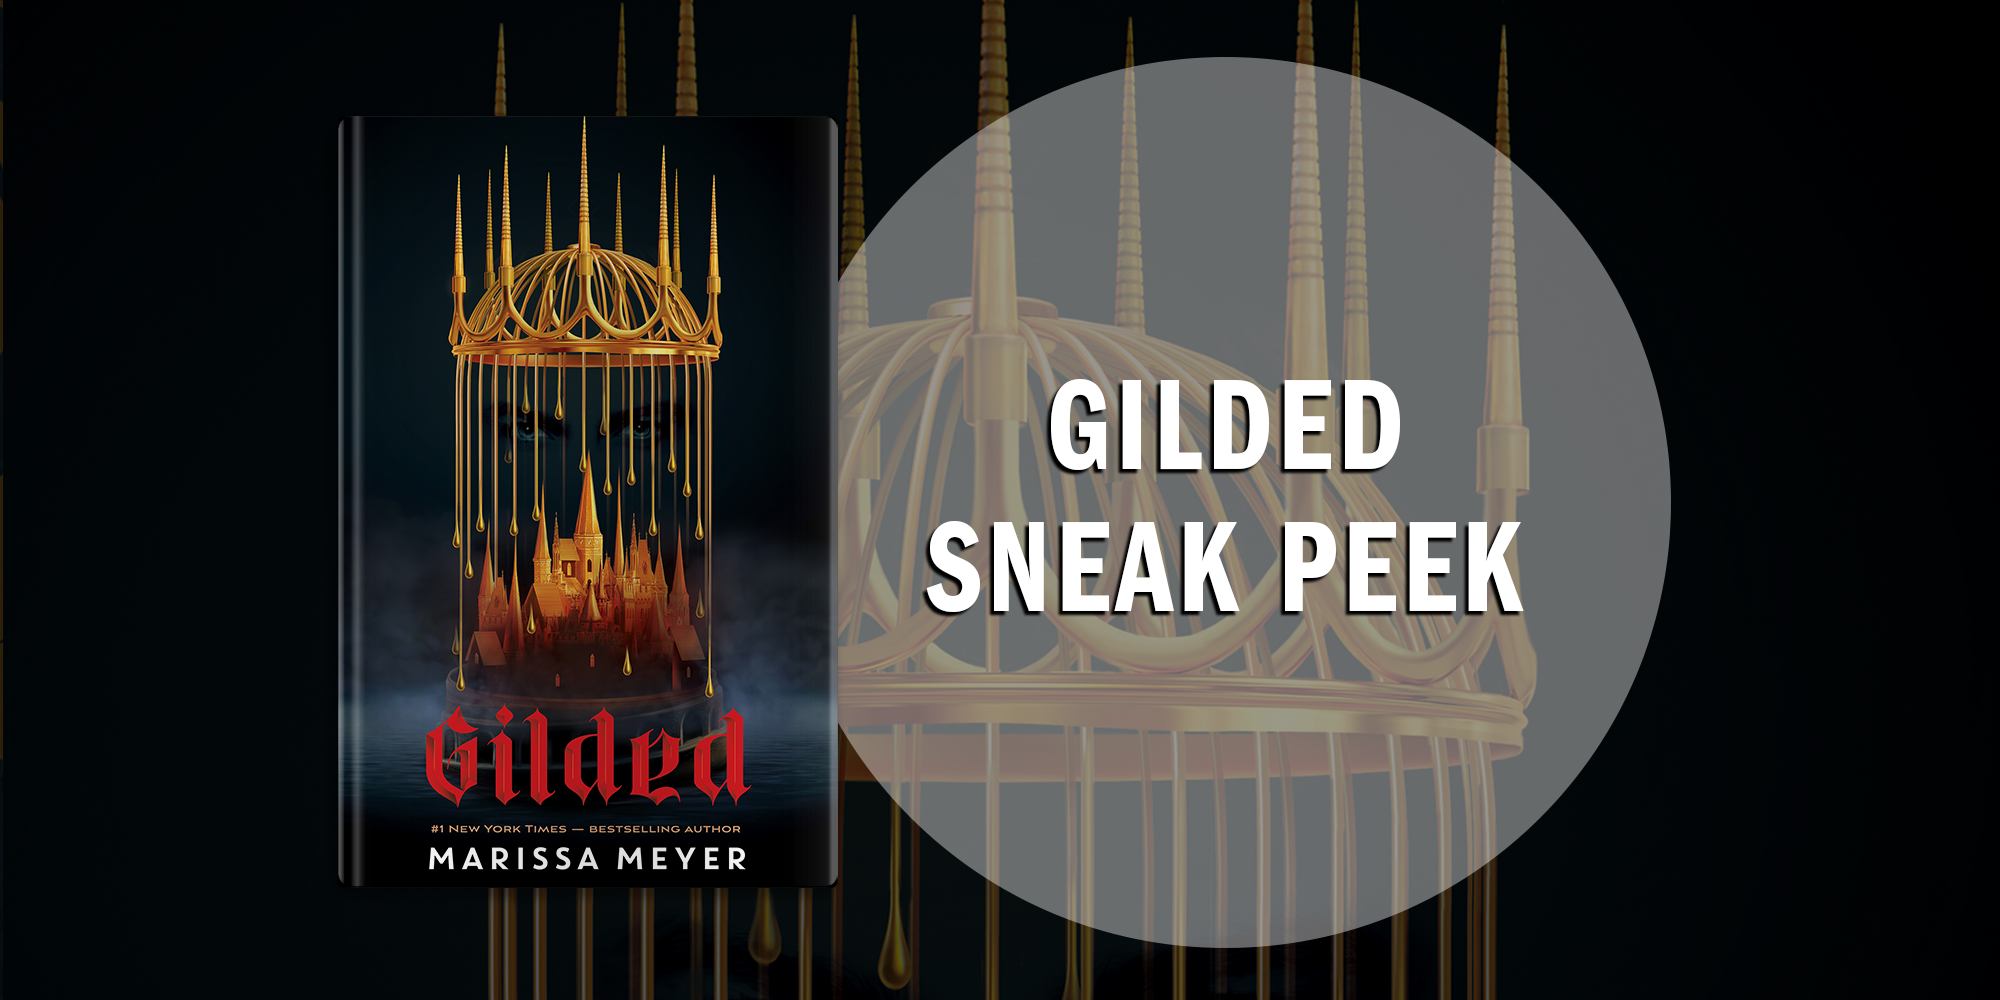 Get Your First Look at Gilded, Marissa Meyer’s Newest Fairytale Retelling